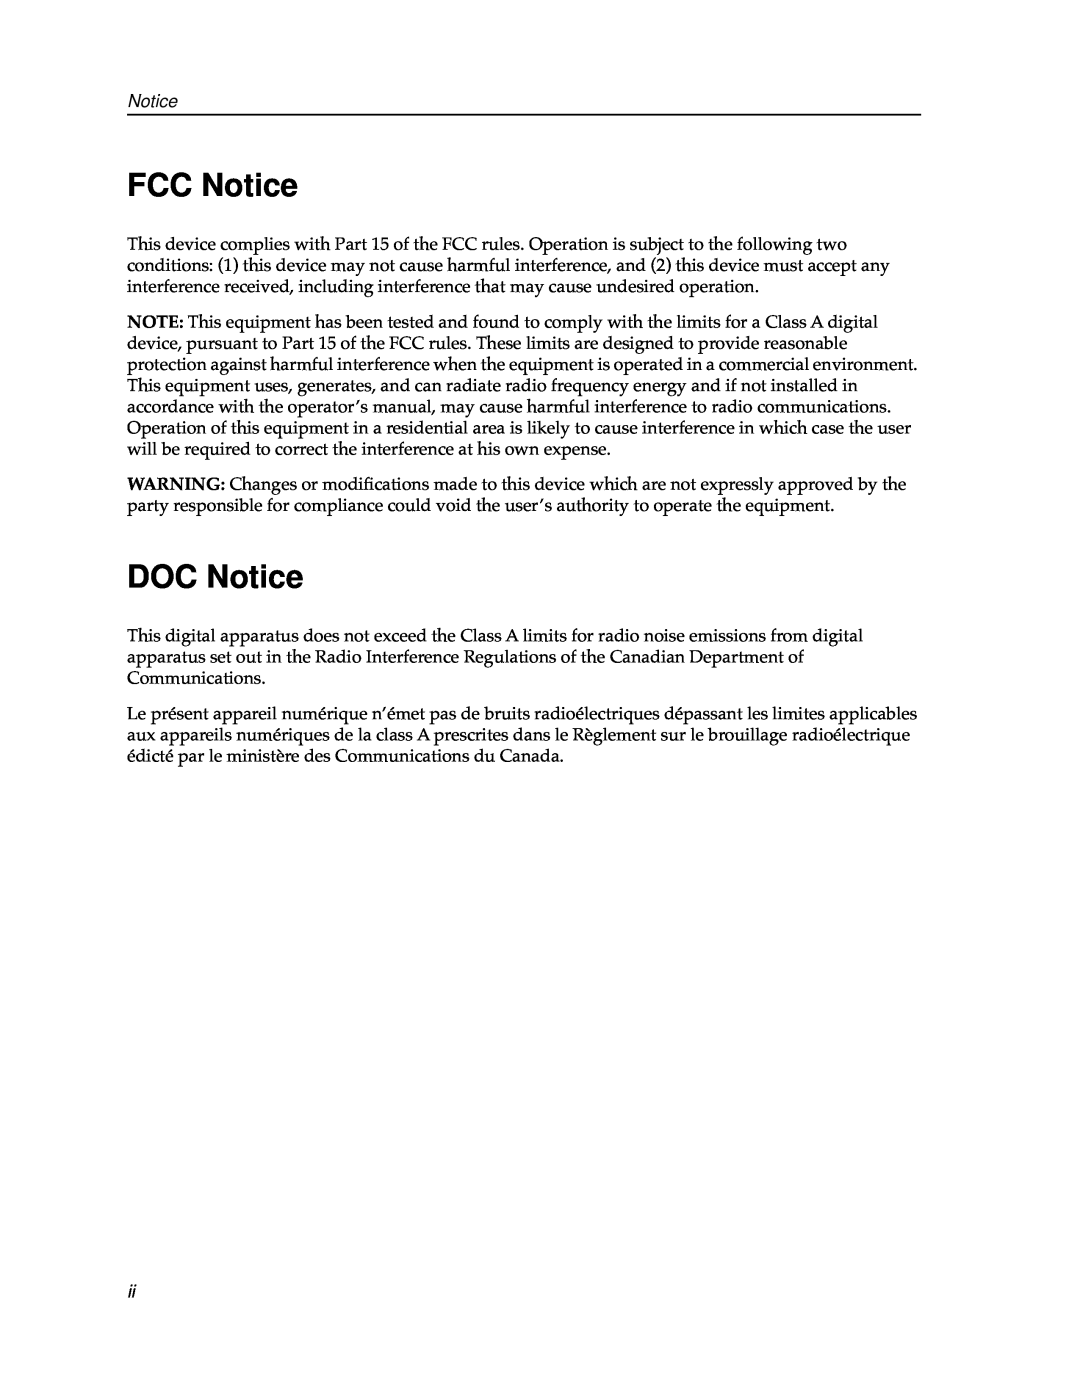 Cabletron Systems 9F310-02, 9F315-02 manual FCC Notice, DOC Notice 